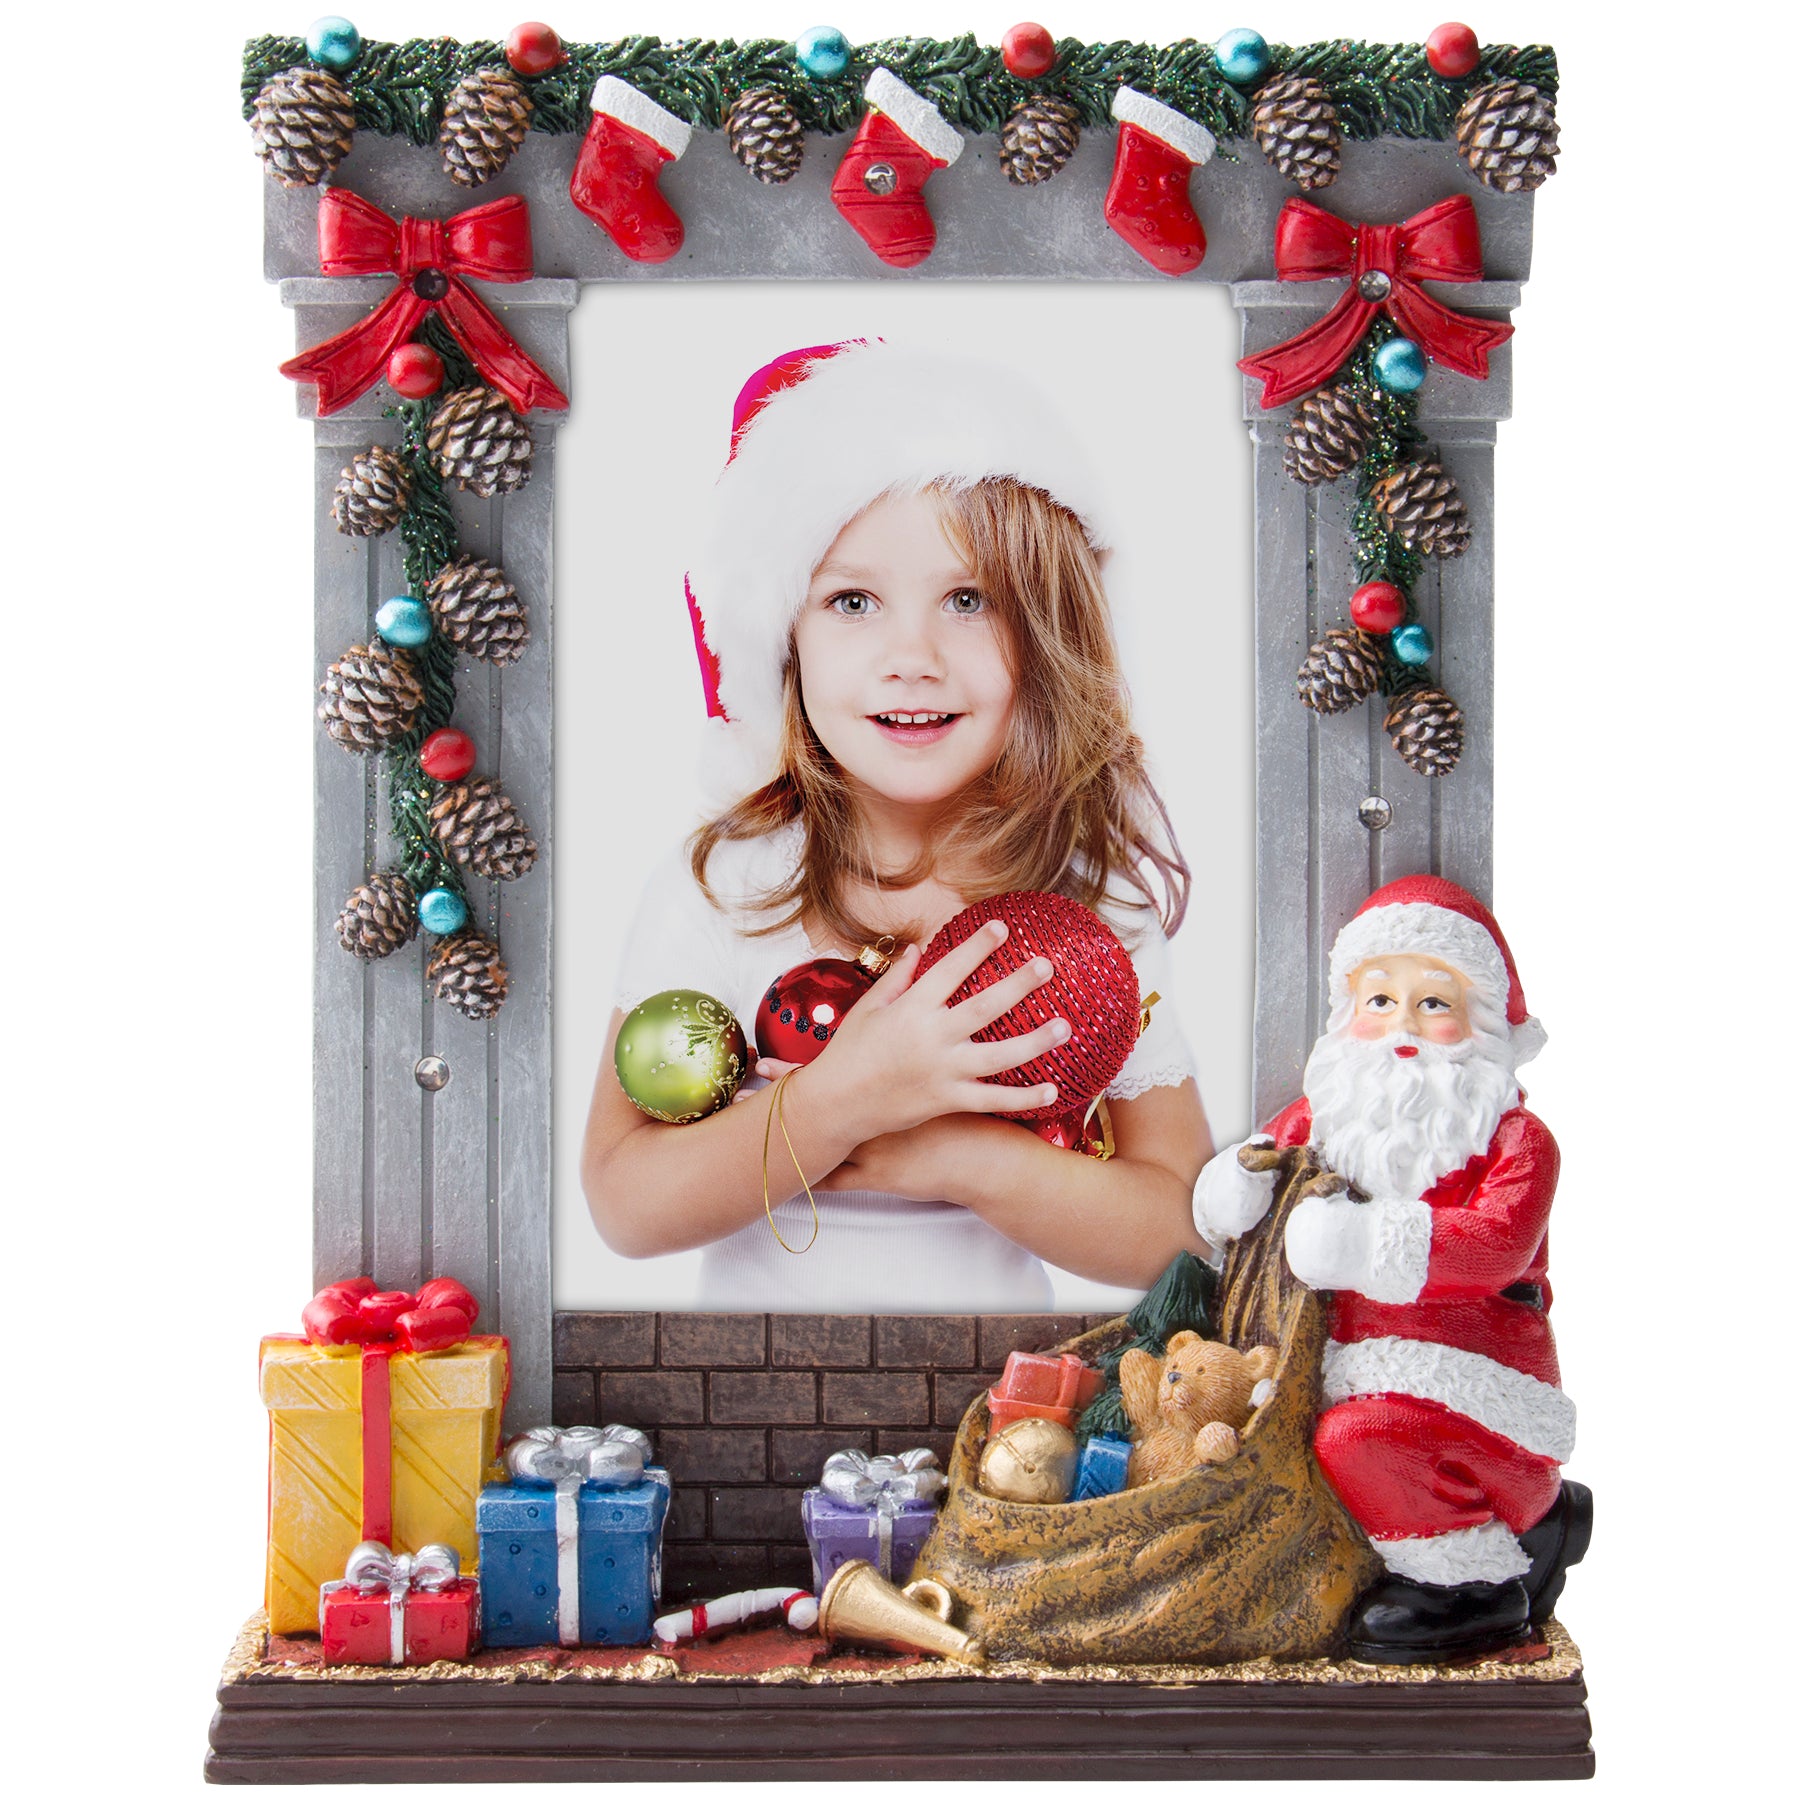 LED Lighted Life Is Better with Friends Matted Picture Frame - 4 x 6 at christmas.com